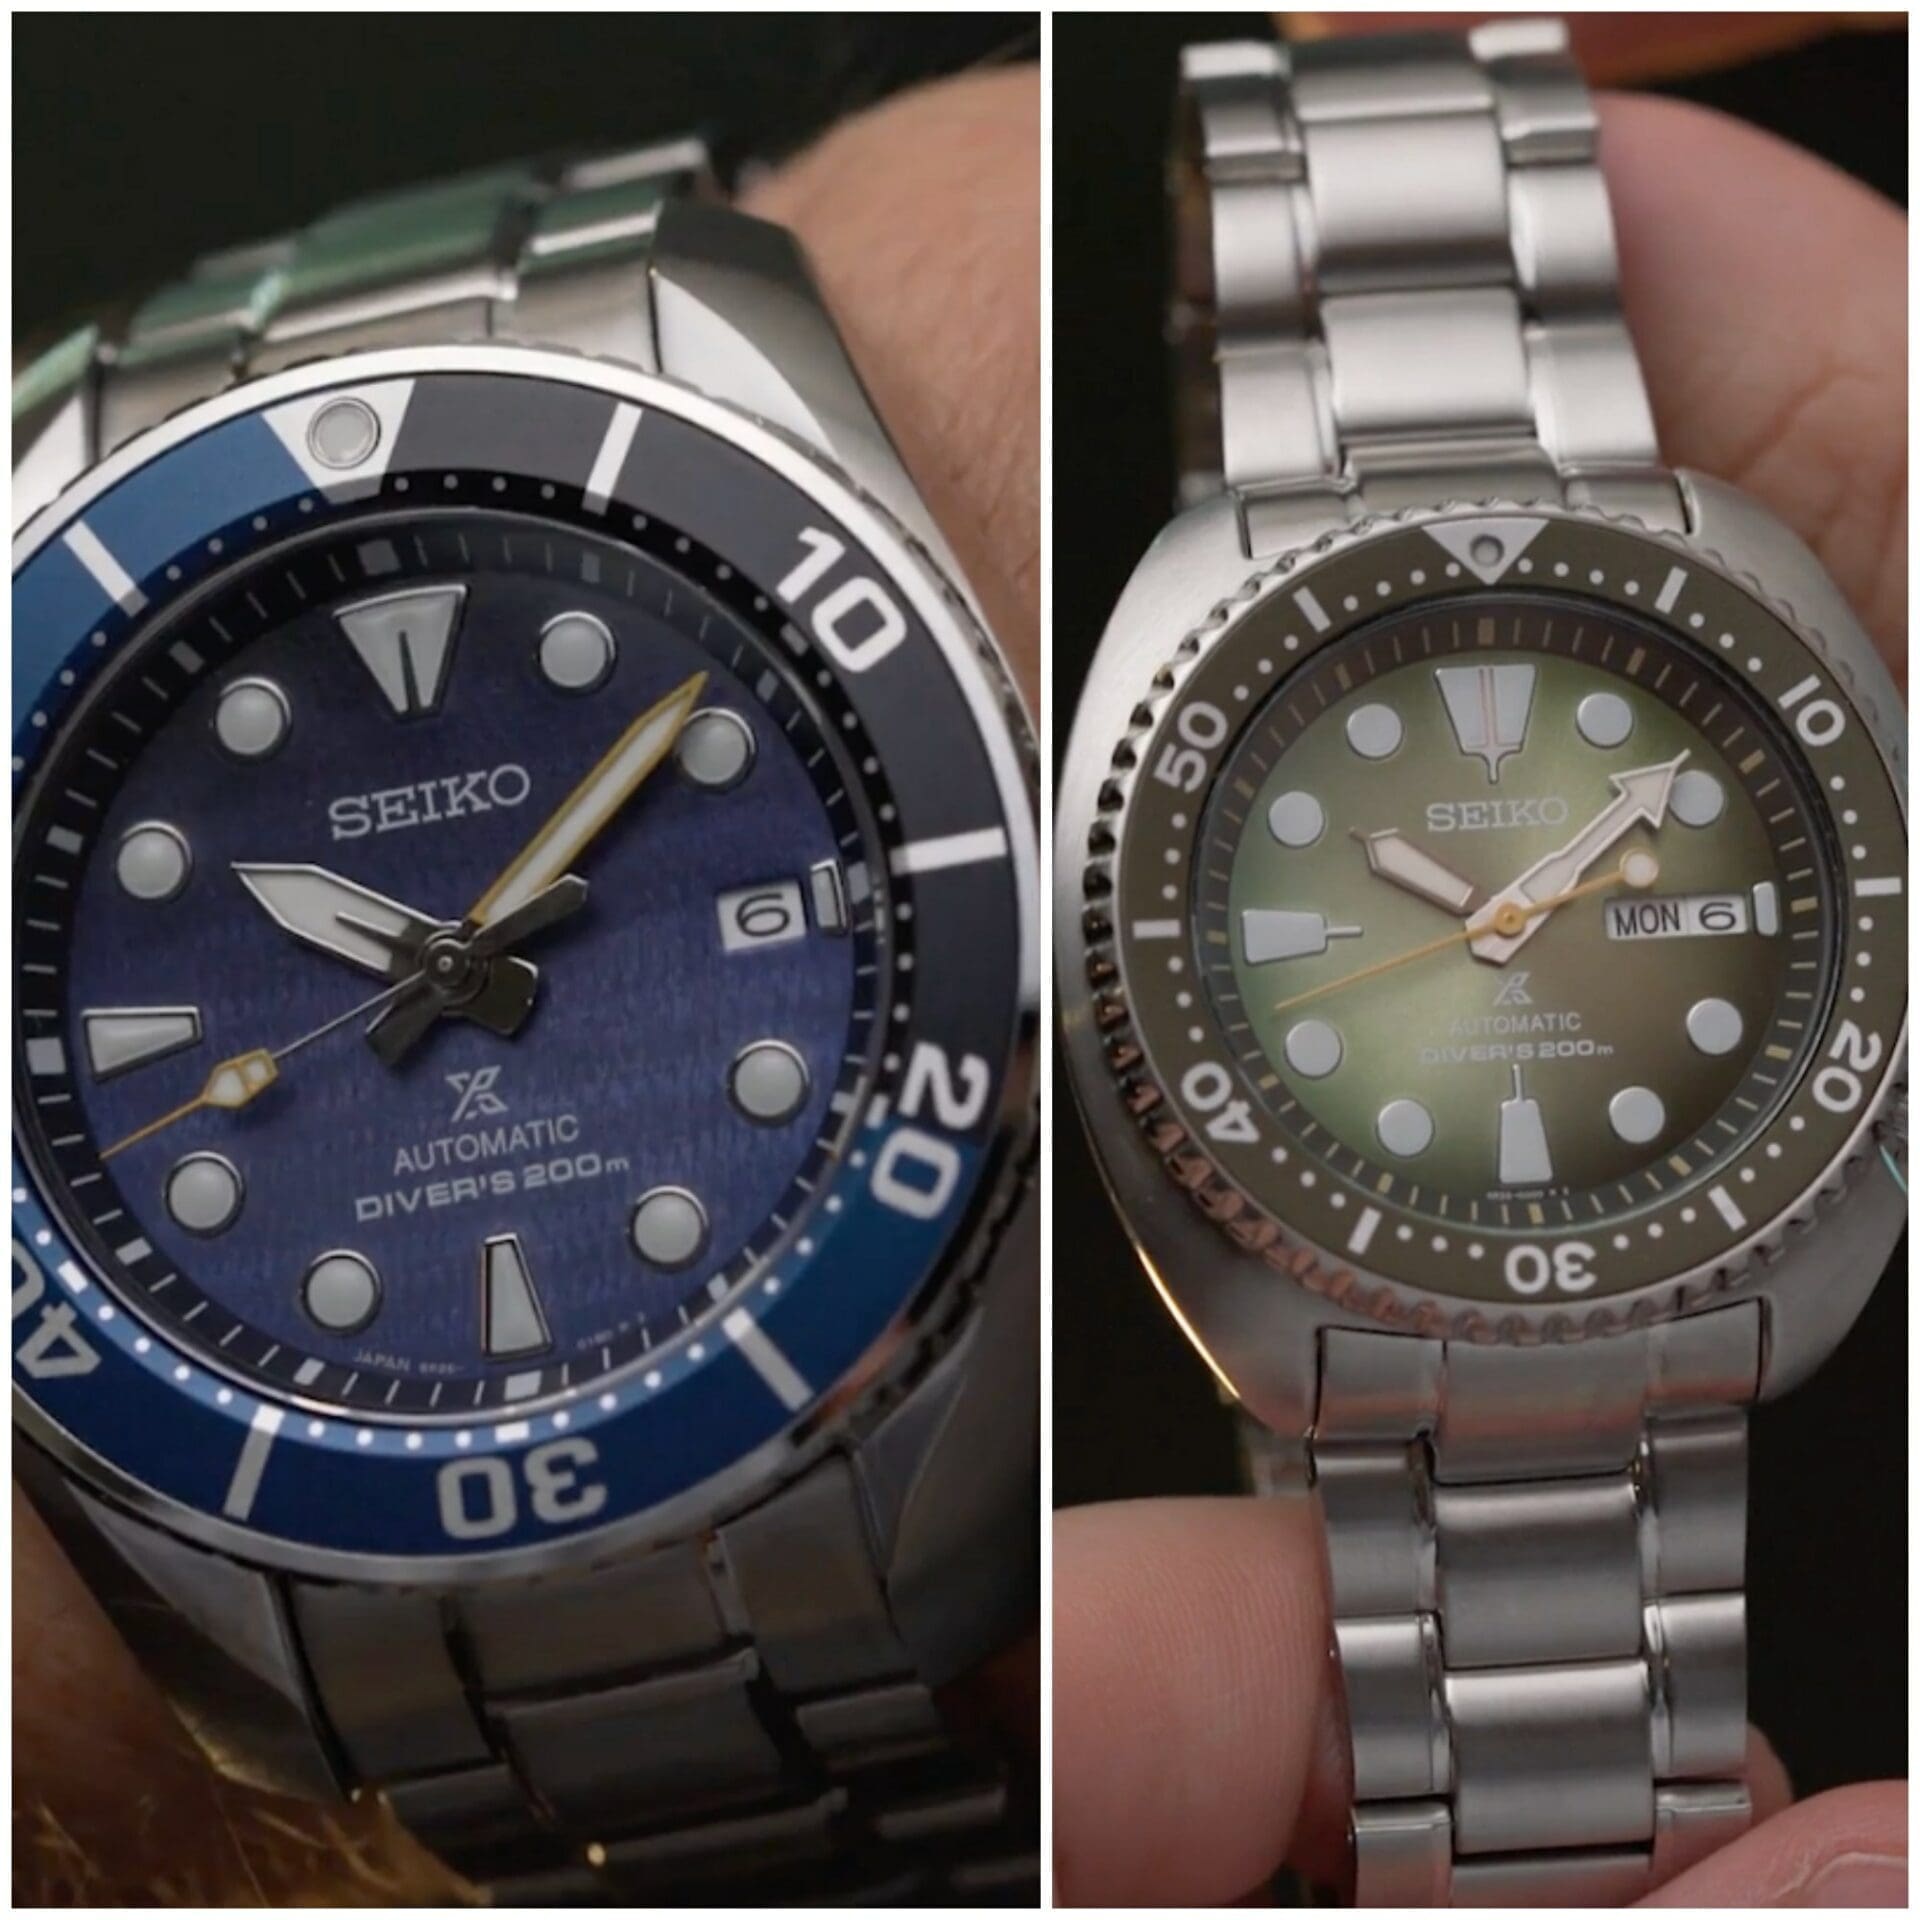 With the new Tudor Black Bay 41 and Black Bay 54, is the BB58 in danger of becoming obsolete?